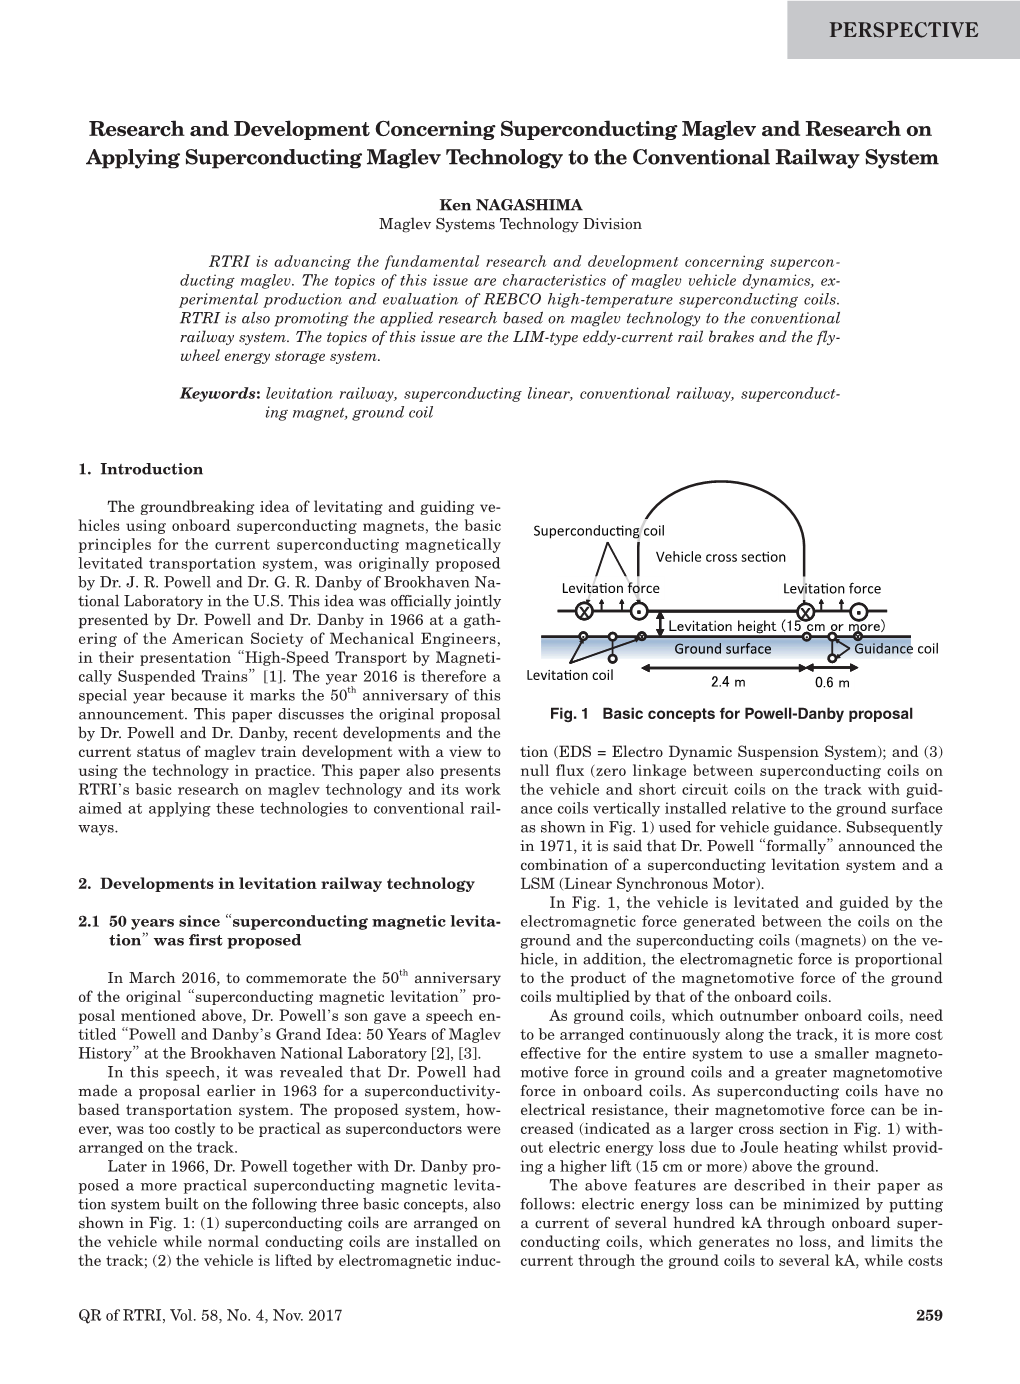 Research and Development Concerning Superconducting Maglev and Research on Applying Superconducting Maglev Technology to the Conventional Railway System